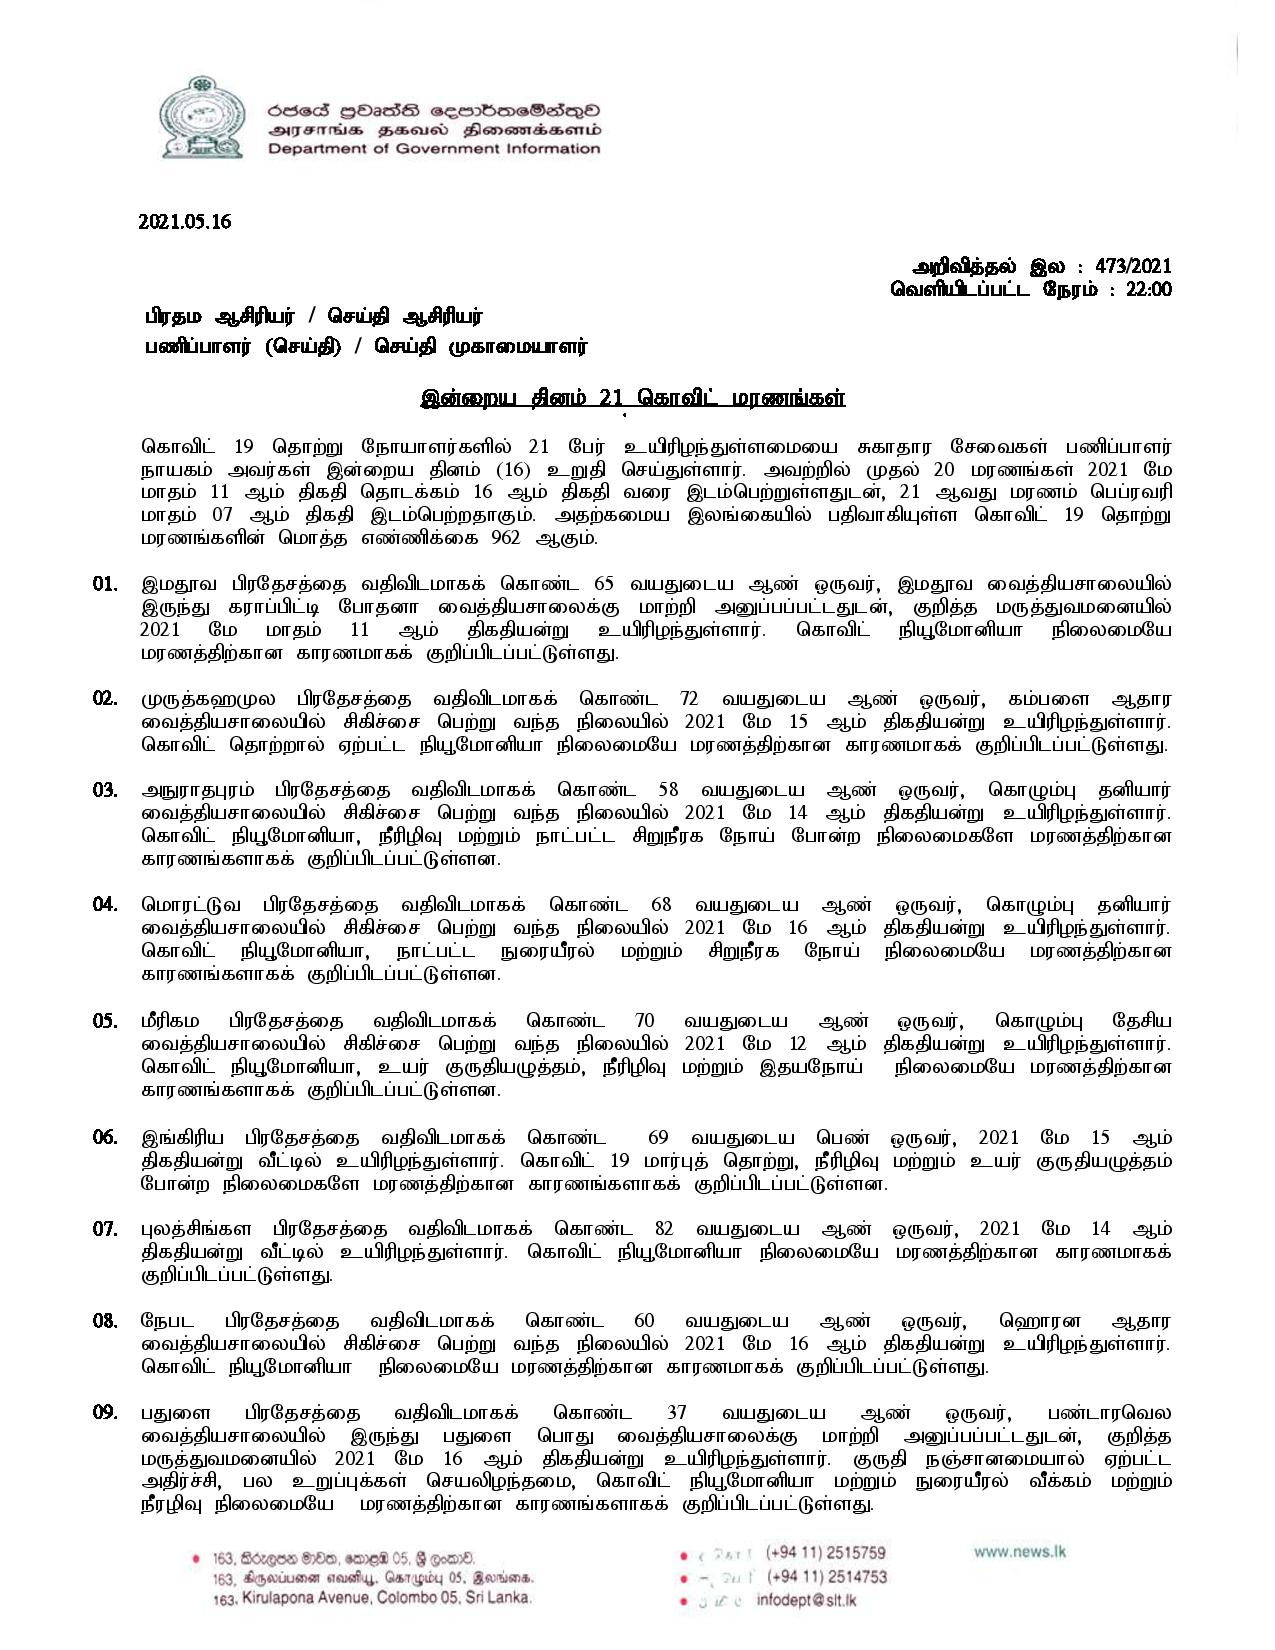 Release No 473 Tamil page 001